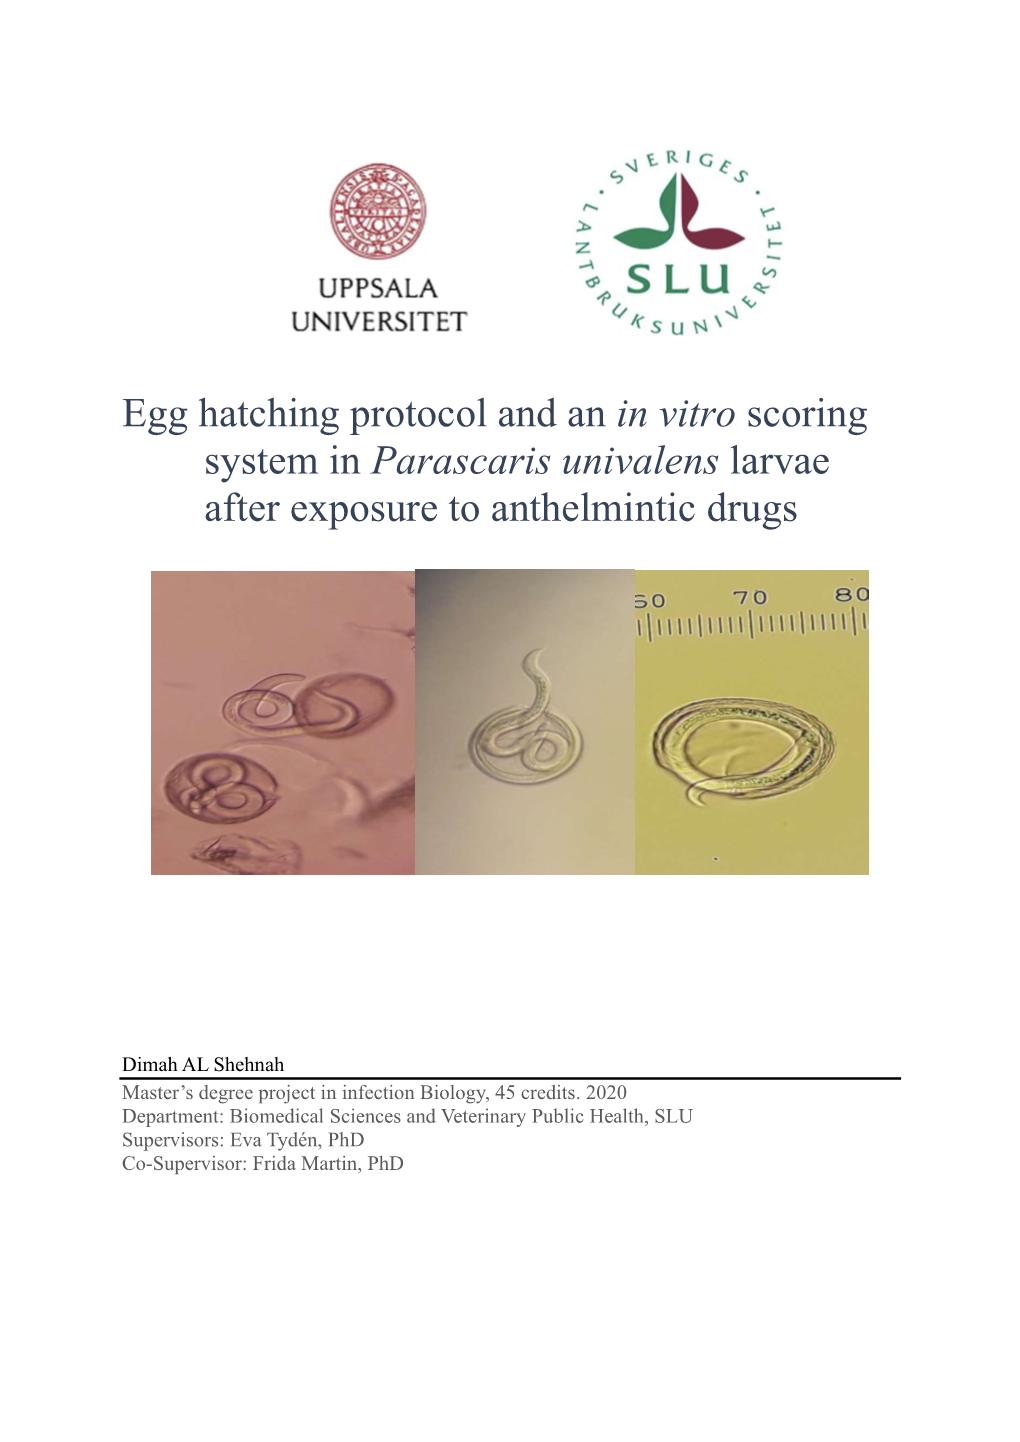 Egg Hatching Protocol and an in Vitro Scoring System in Parascaris Univalens Larvae After Exposure to Anthelmintic Drugs